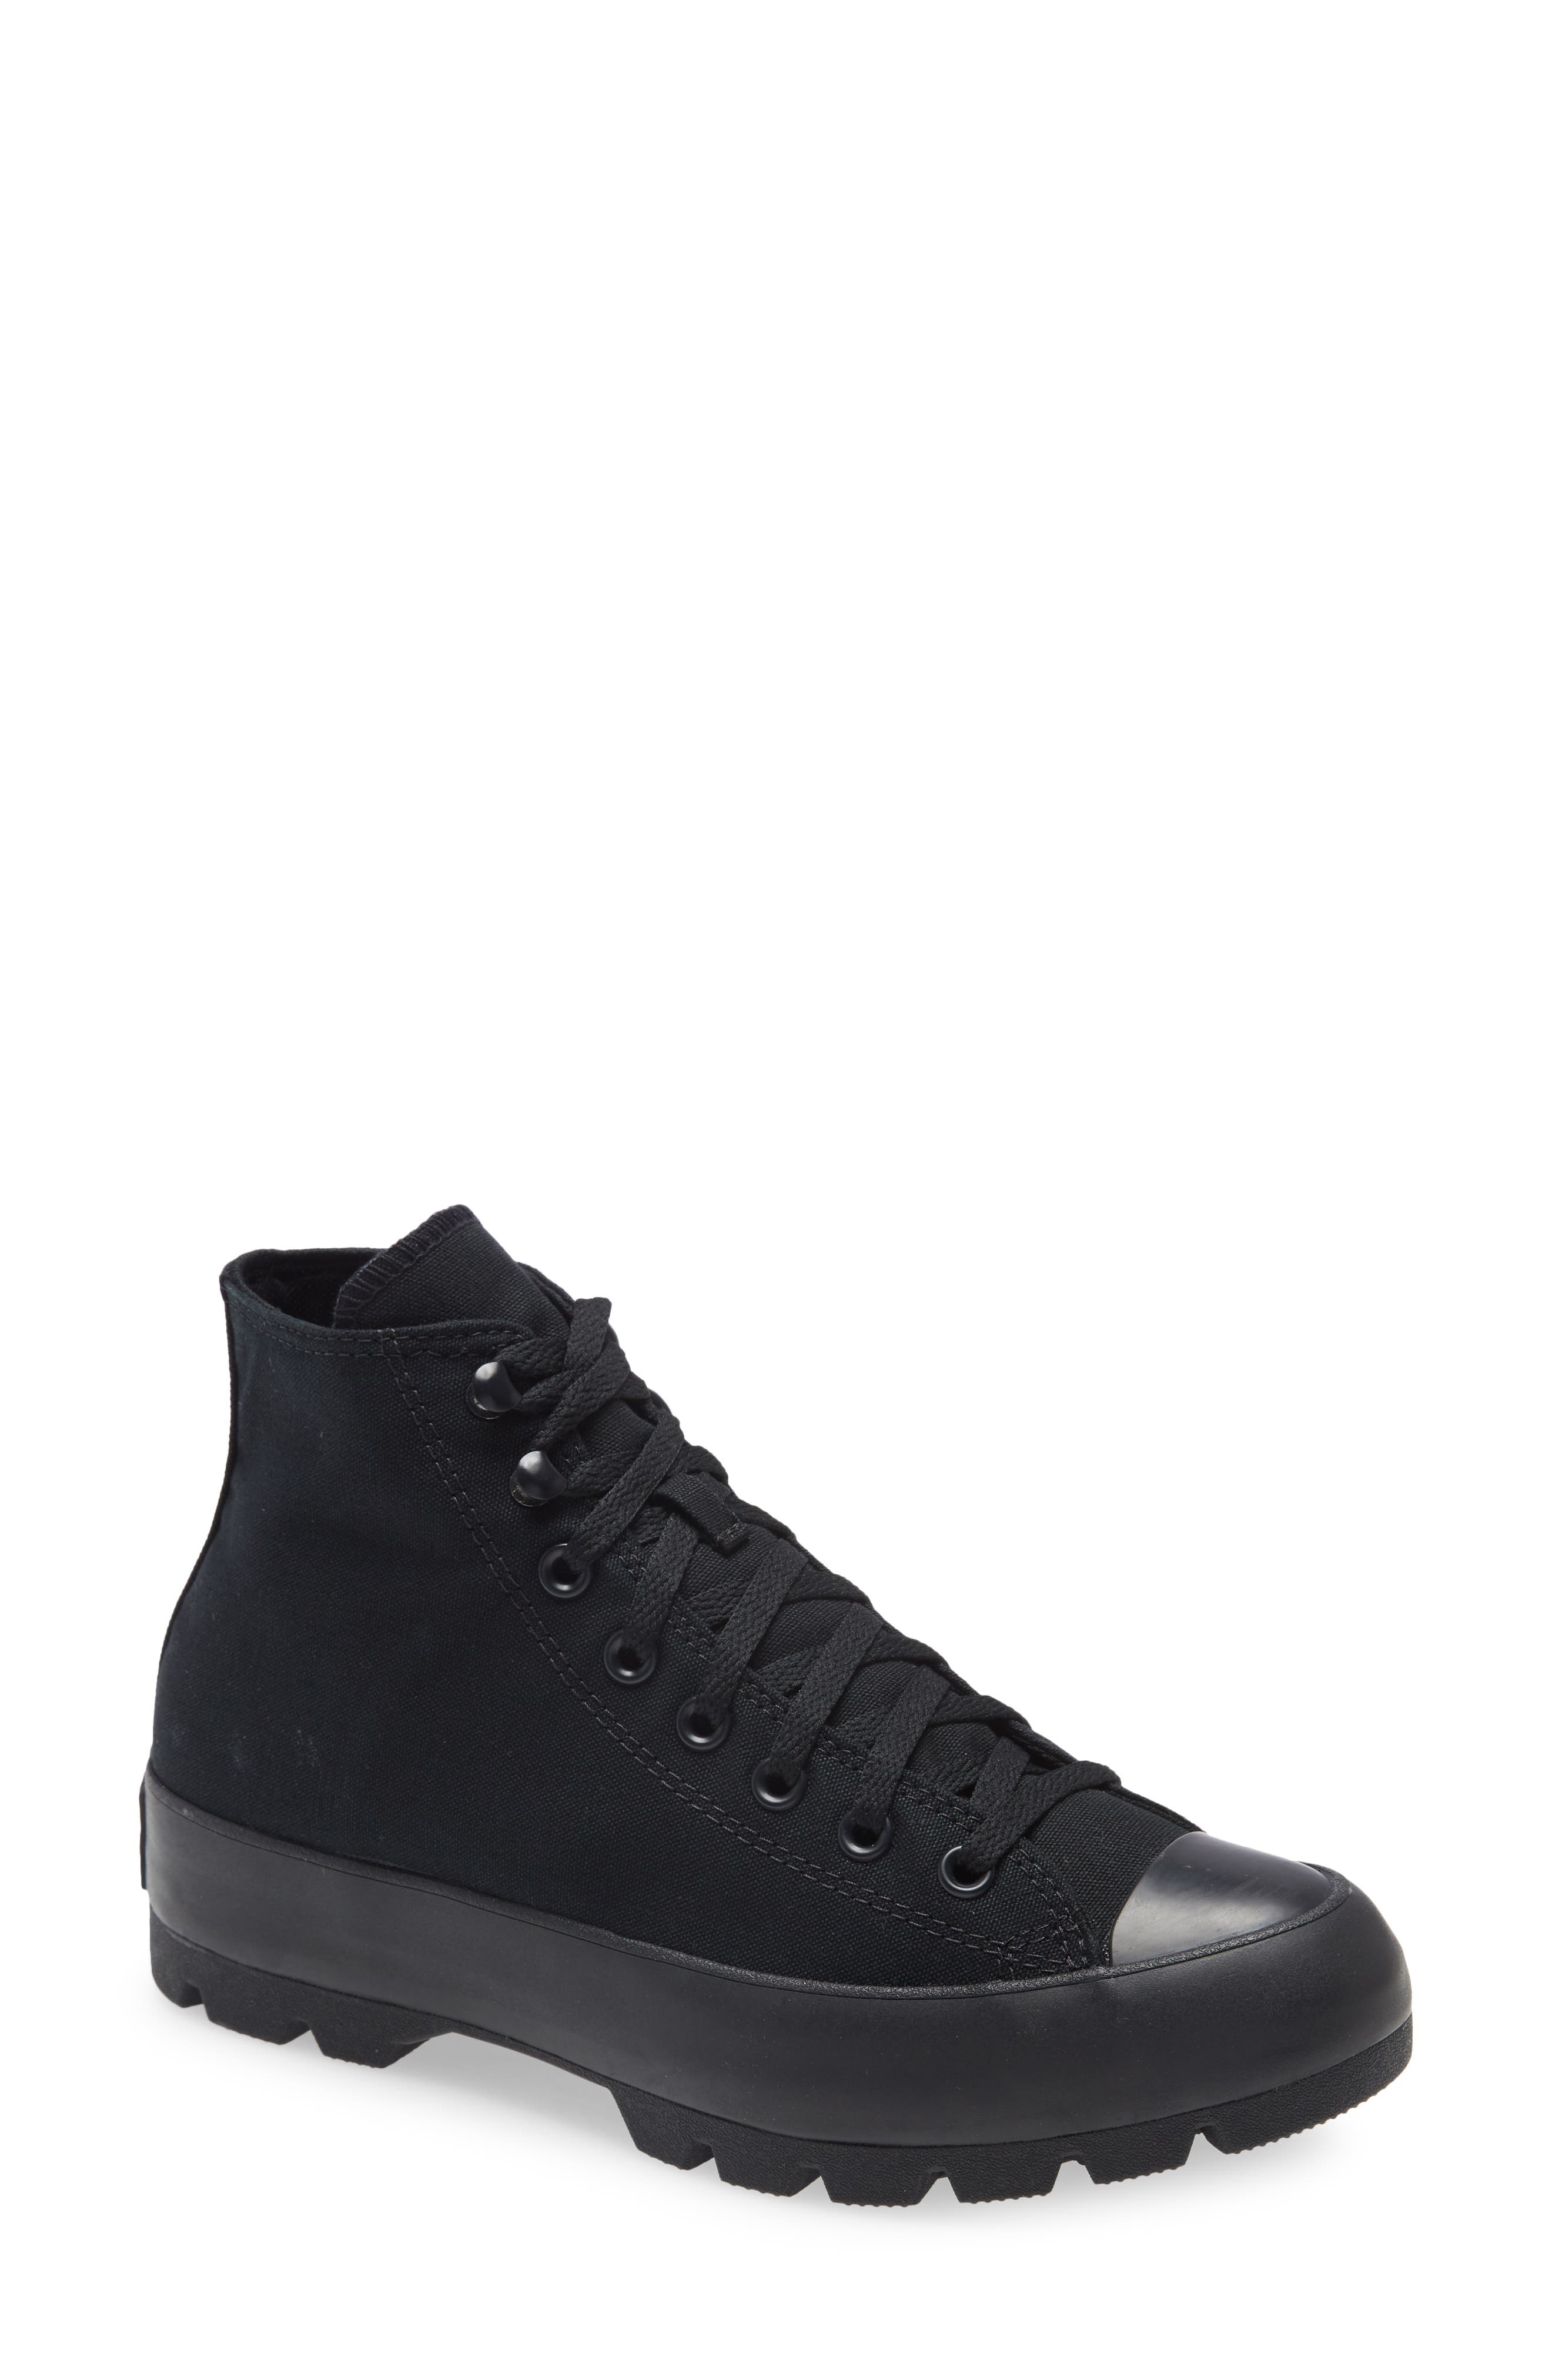 UPC 194432518513 product image for Converse Chuck Taylor(R) All Star(R) Lugged Boot in Black/Black/Black at Nordstr | upcitemdb.com